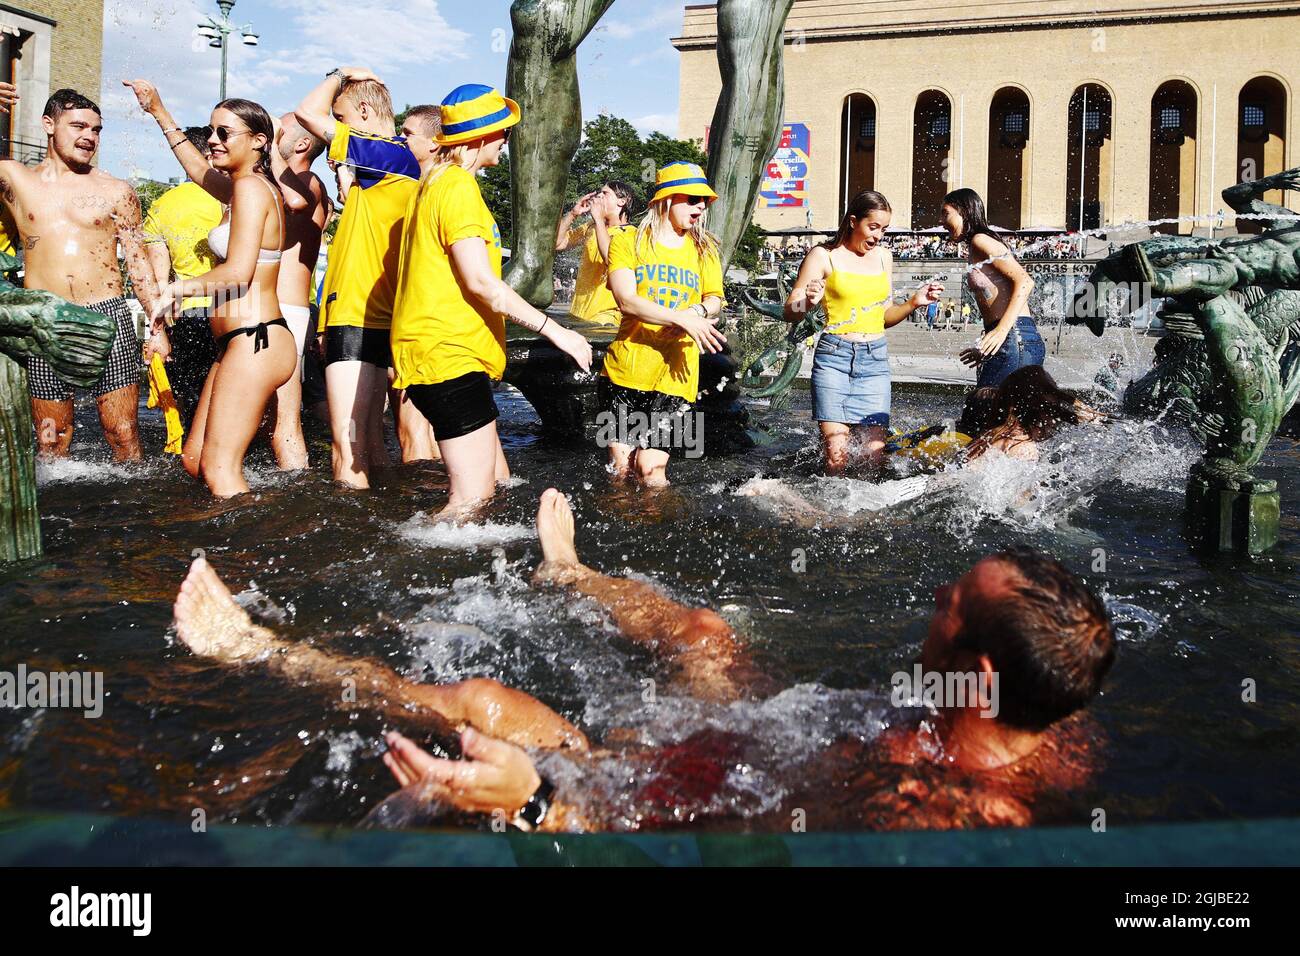 Swedish soccer fans celebrate after Sweden won against Mexico during the Russia 2018 World Cup Group F soccer match, bathing in a fountain at Gotaplatsen in central Gothenburg, Sweden, on June 27, 2018. Photo: Thomas Johansson / TT / code 9200  Stock Photo